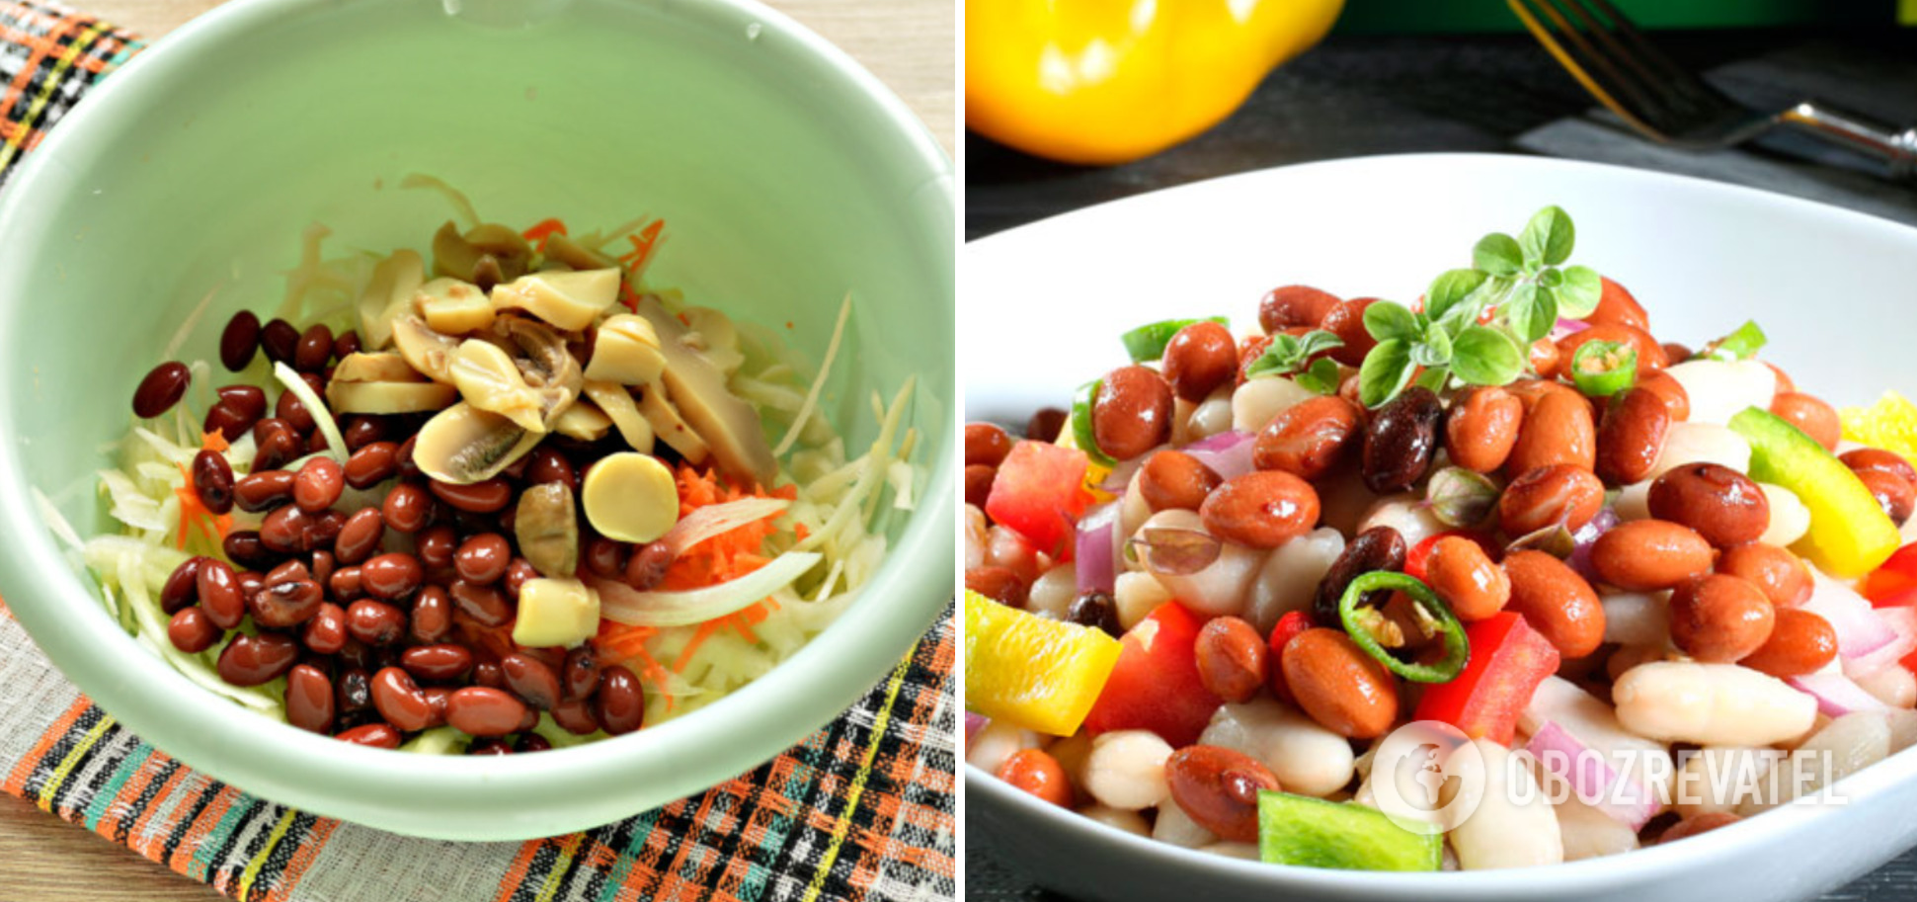 Bean salad without mayonnaise